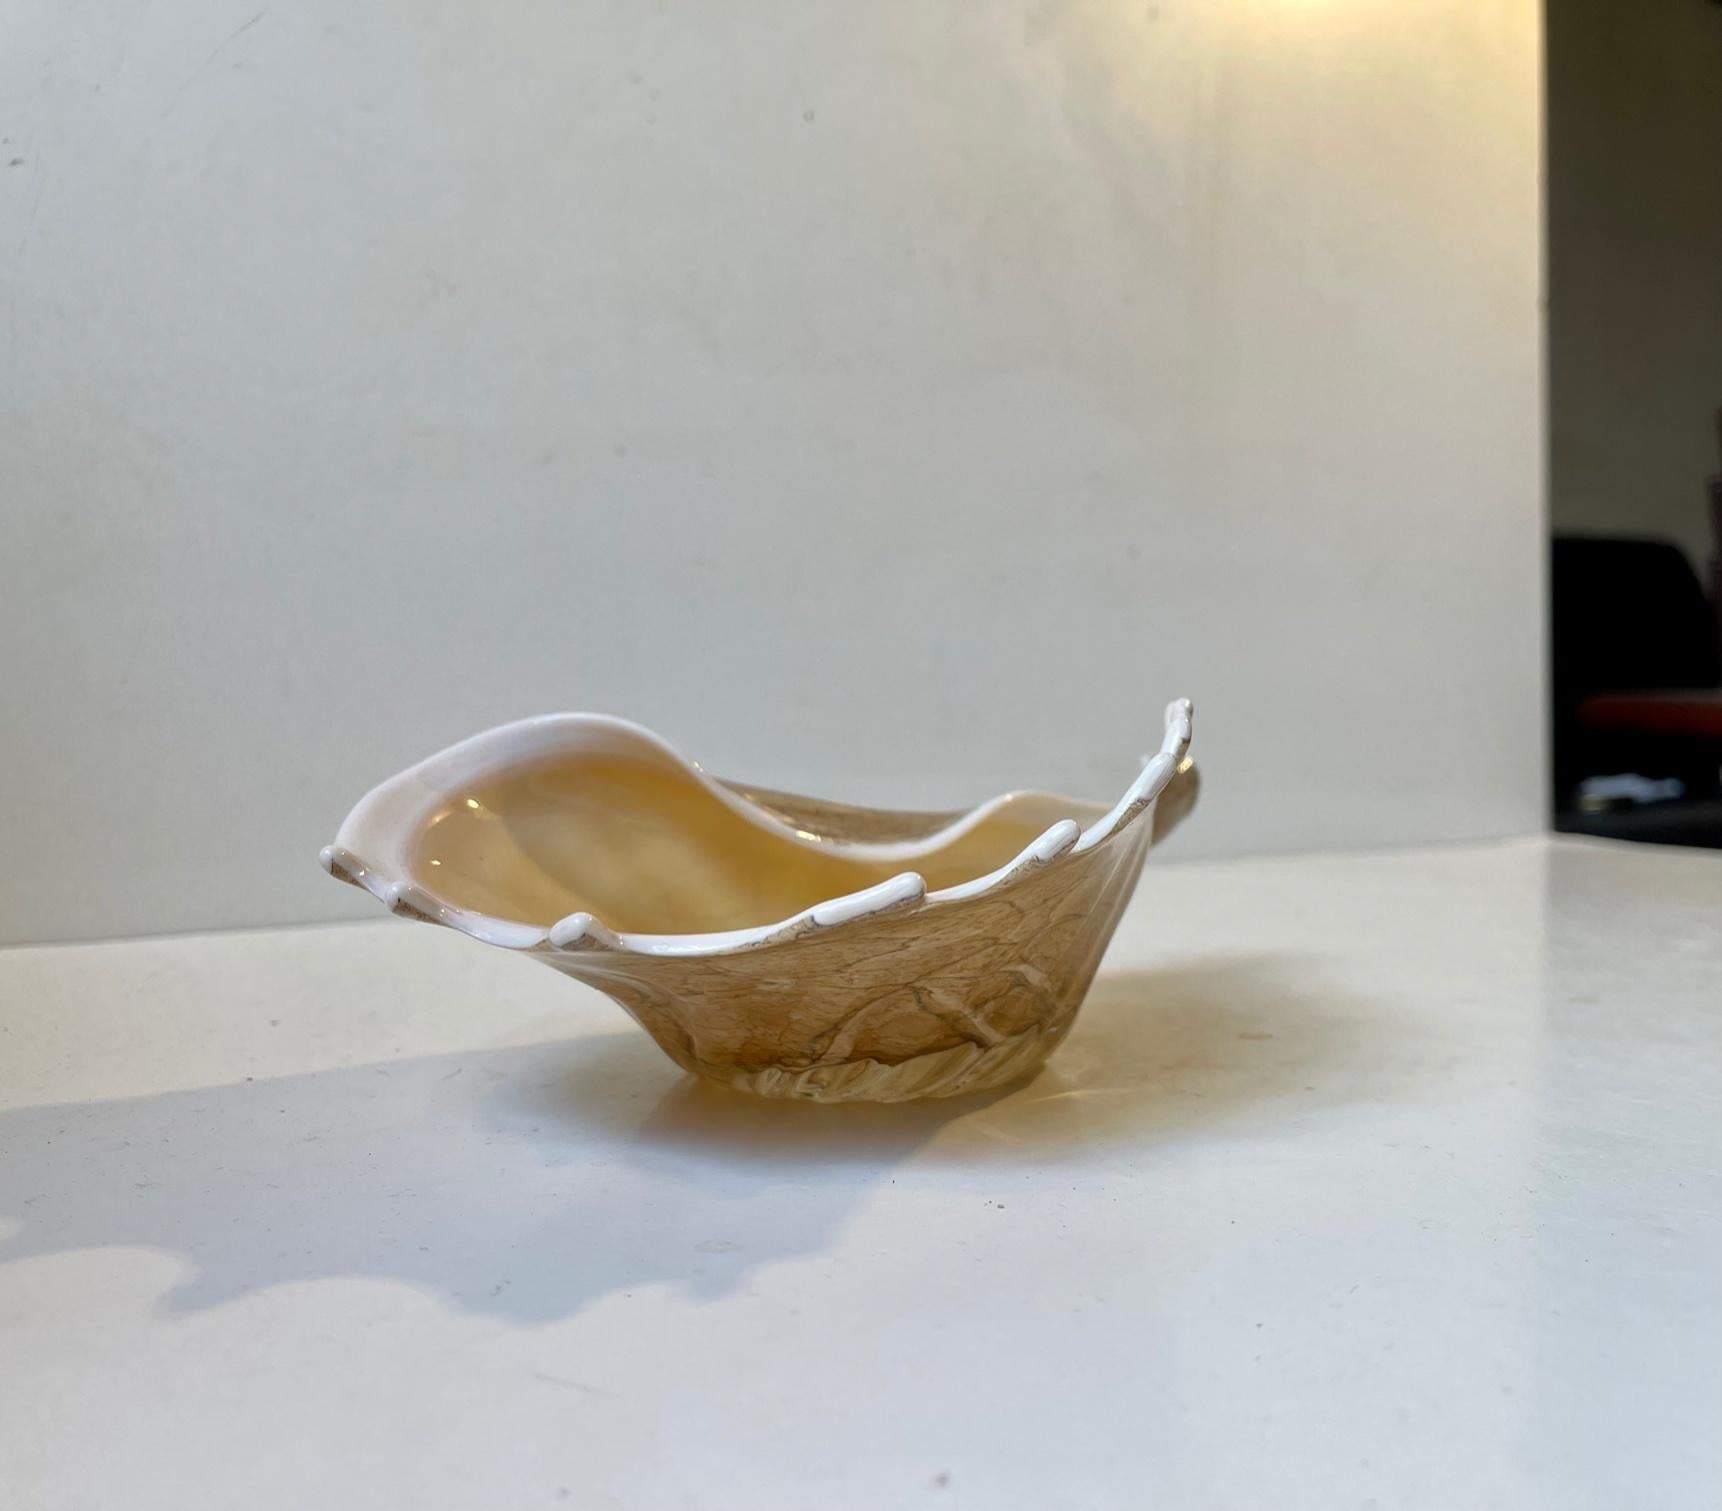 A handblown clam shell bowl in textured glass. Very natural looking piece close mimicking the real deal. It was manufactured in Murano Italy circa 1970-80 in a style reminiscent of Barovier & Toso. Measurements: L: 20 cm, H: 6 cm.